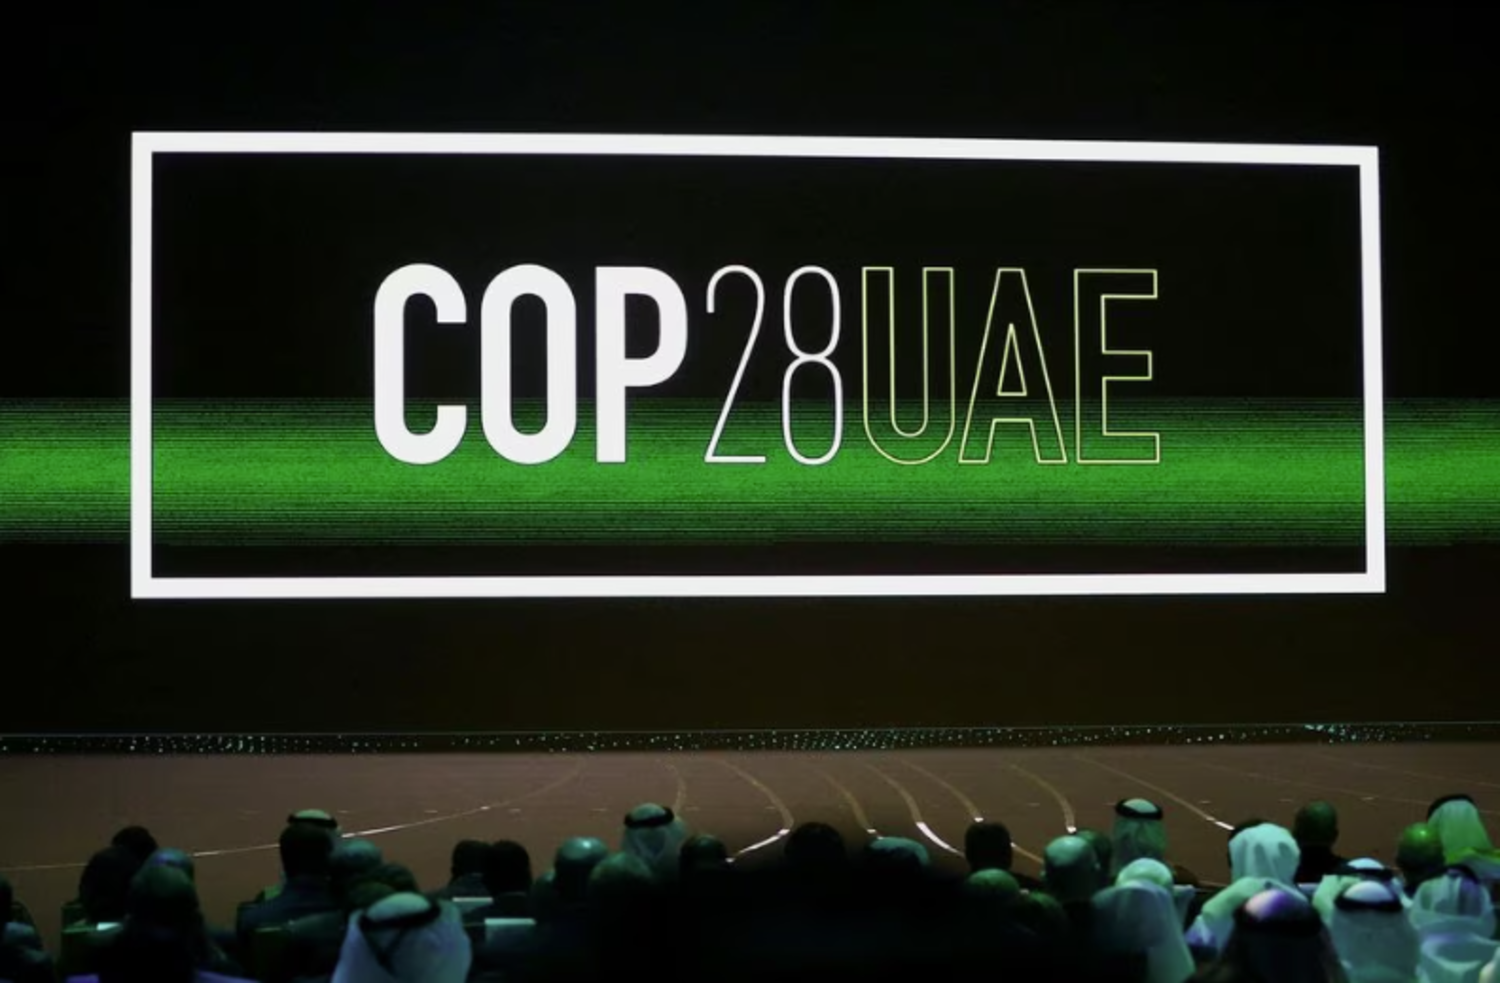 'Cop28 UAE' logo is displayed on the screen during the opening ceremony of Abu Dhabi Sustainability Week (ADSW) under the theme of 'United on Climate Action Toward COP28', in Abu Dhabi, UAE, January 16, 2023. REUTERS/Rula Rouhana  